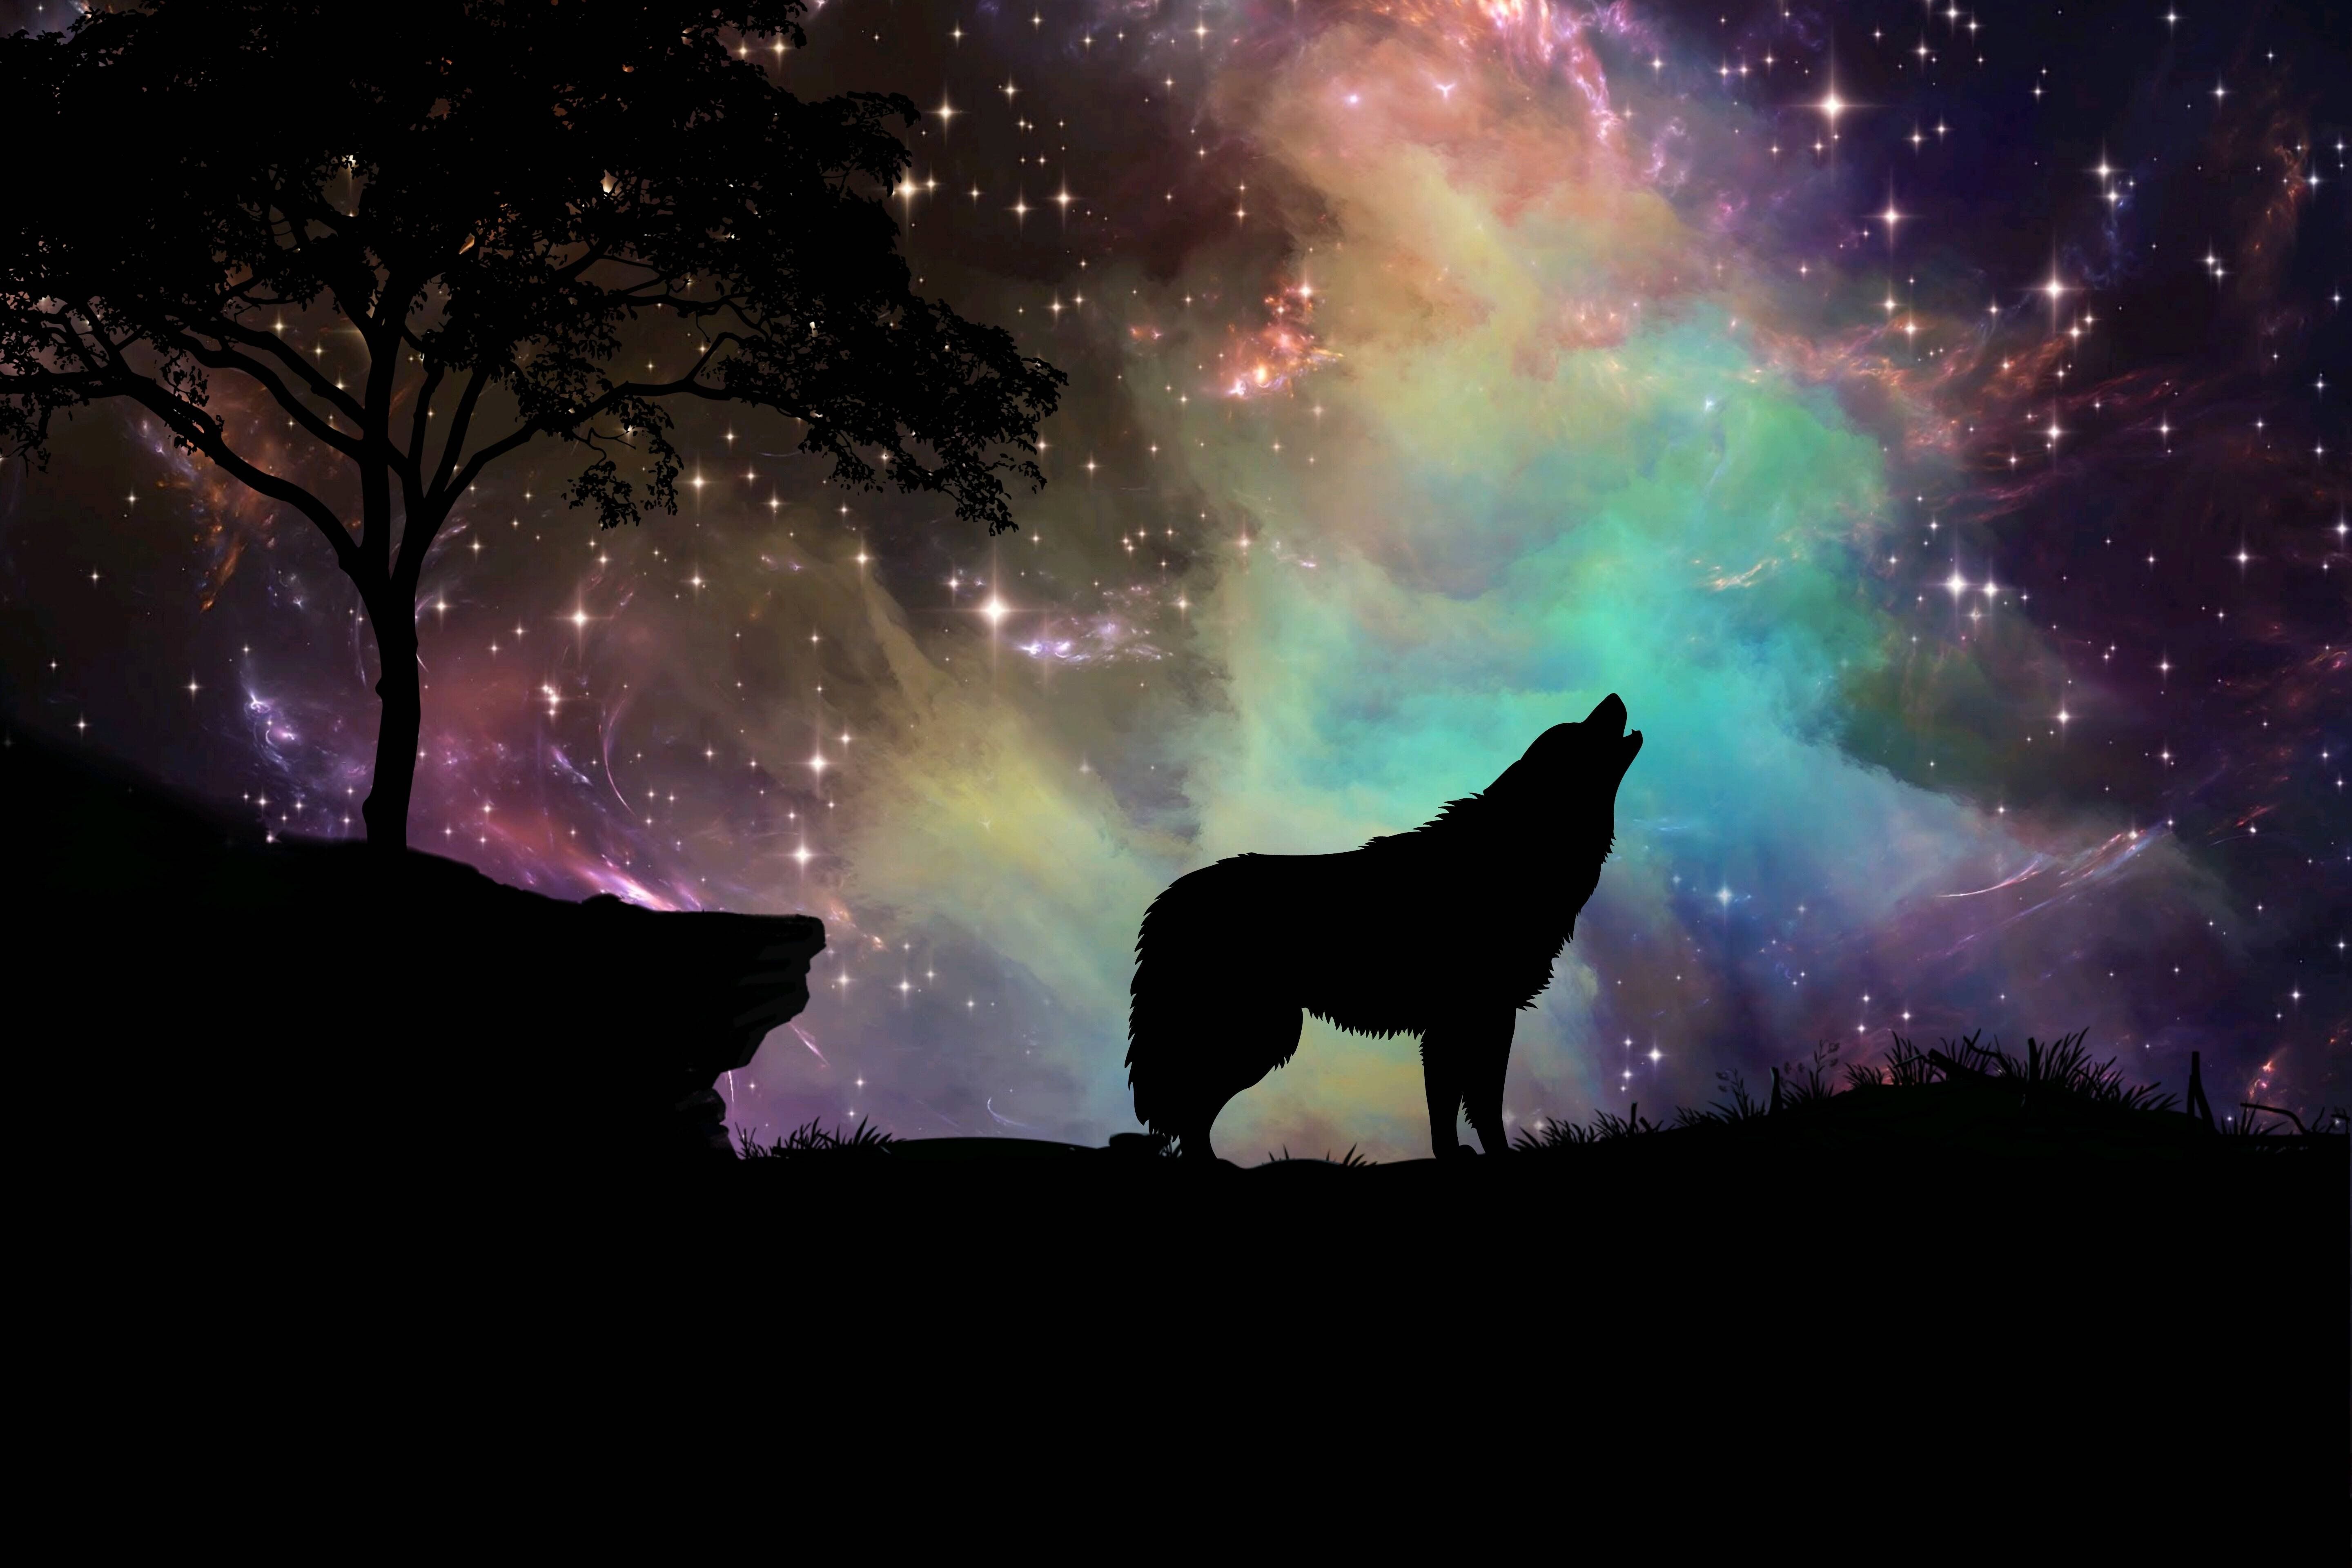 howling 4K wallpaper for your desktop or mobile screen free